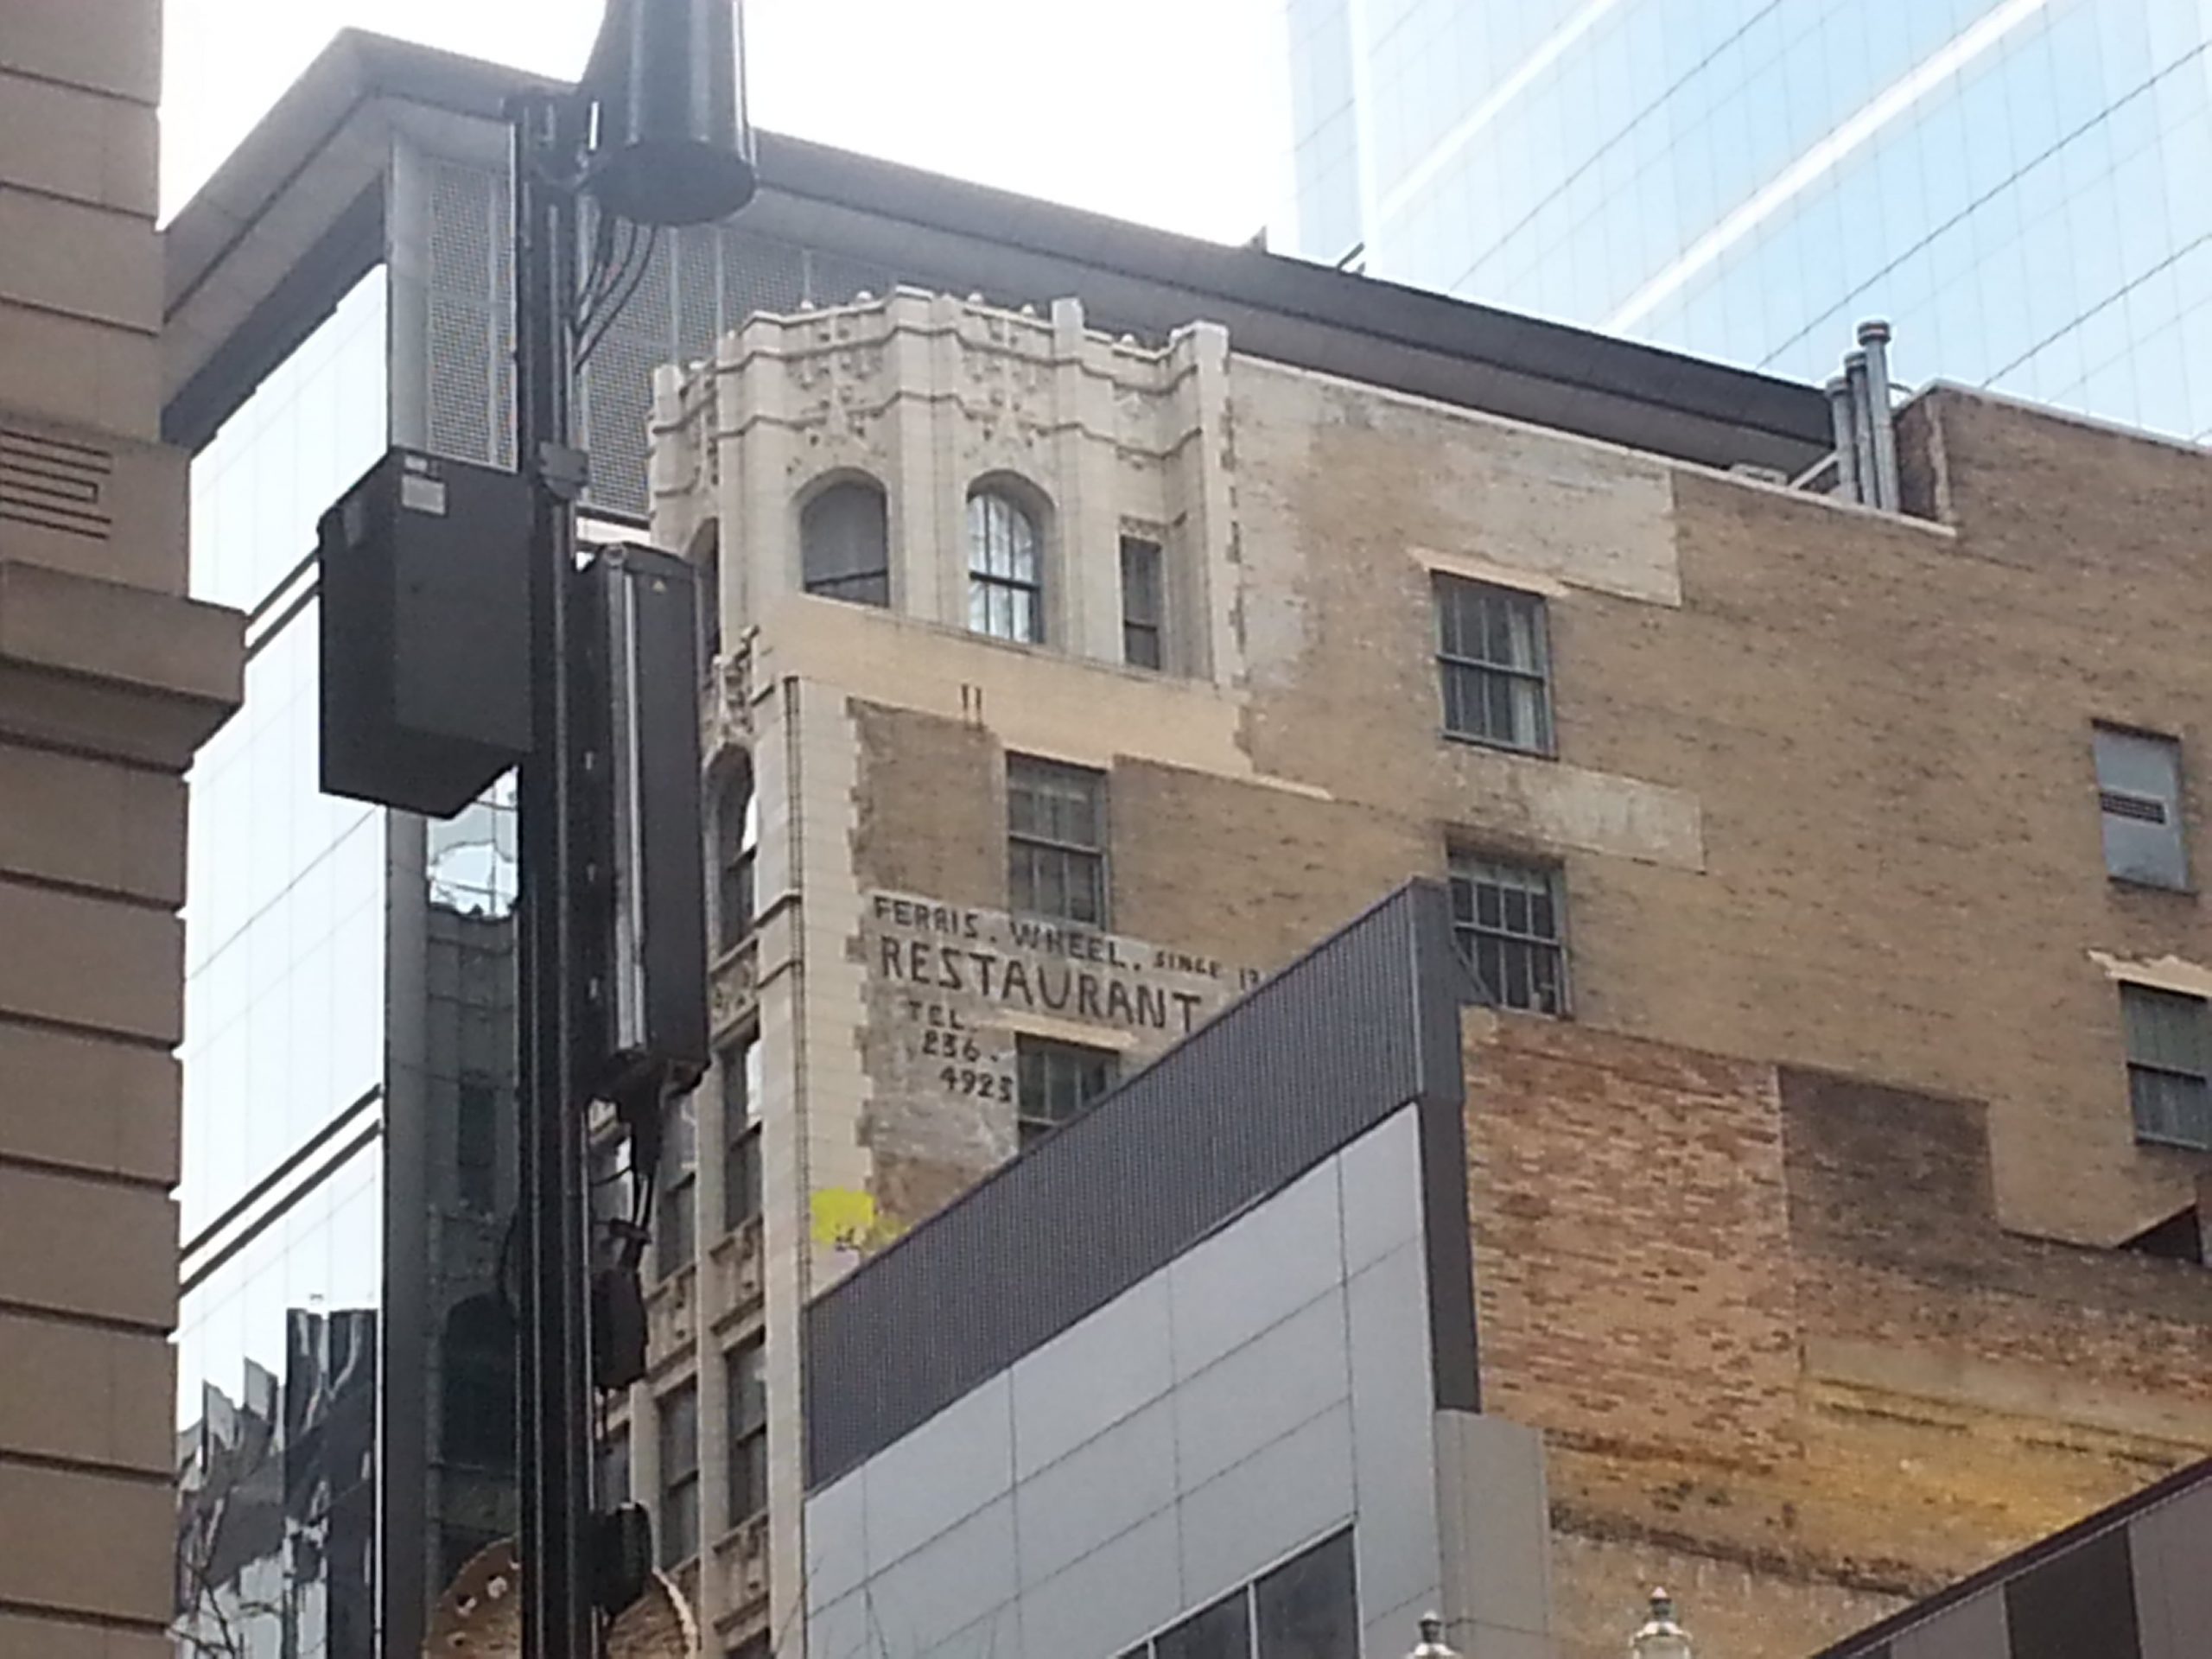 Ferris Wheel Restaurant Ghost Signs Chicago Detours The Loop State Street